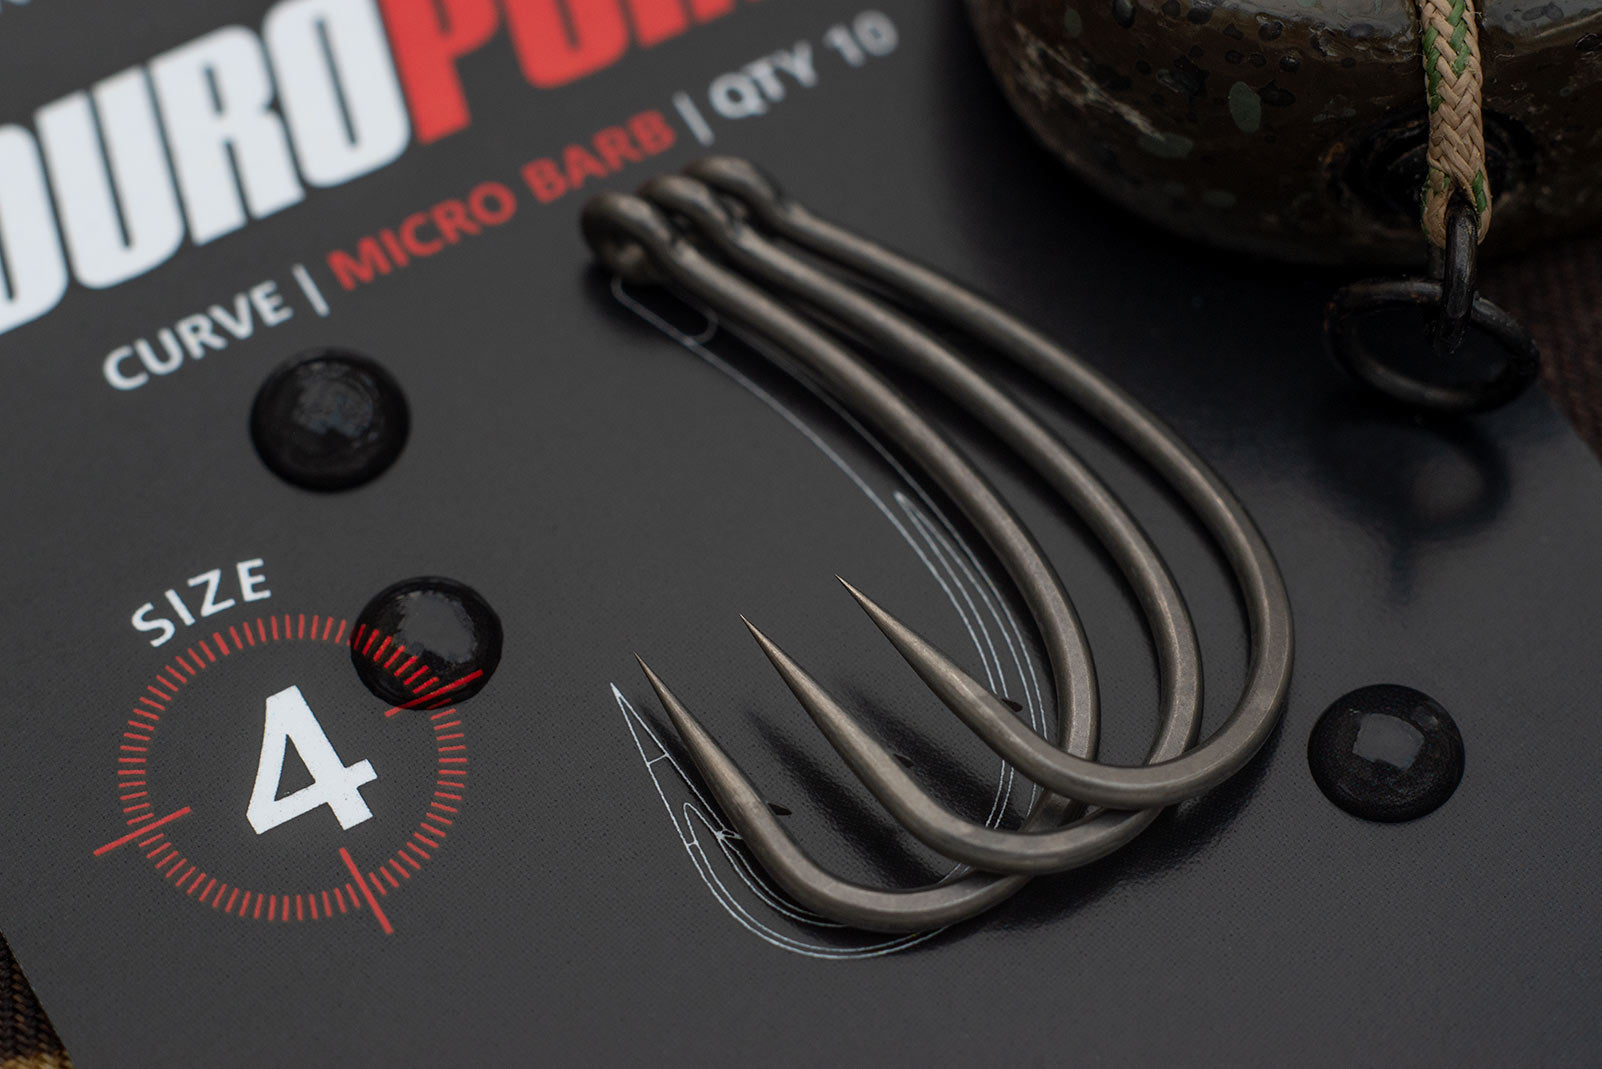 Duropoint Curve shank hooks - the ultimate spinner rig hook